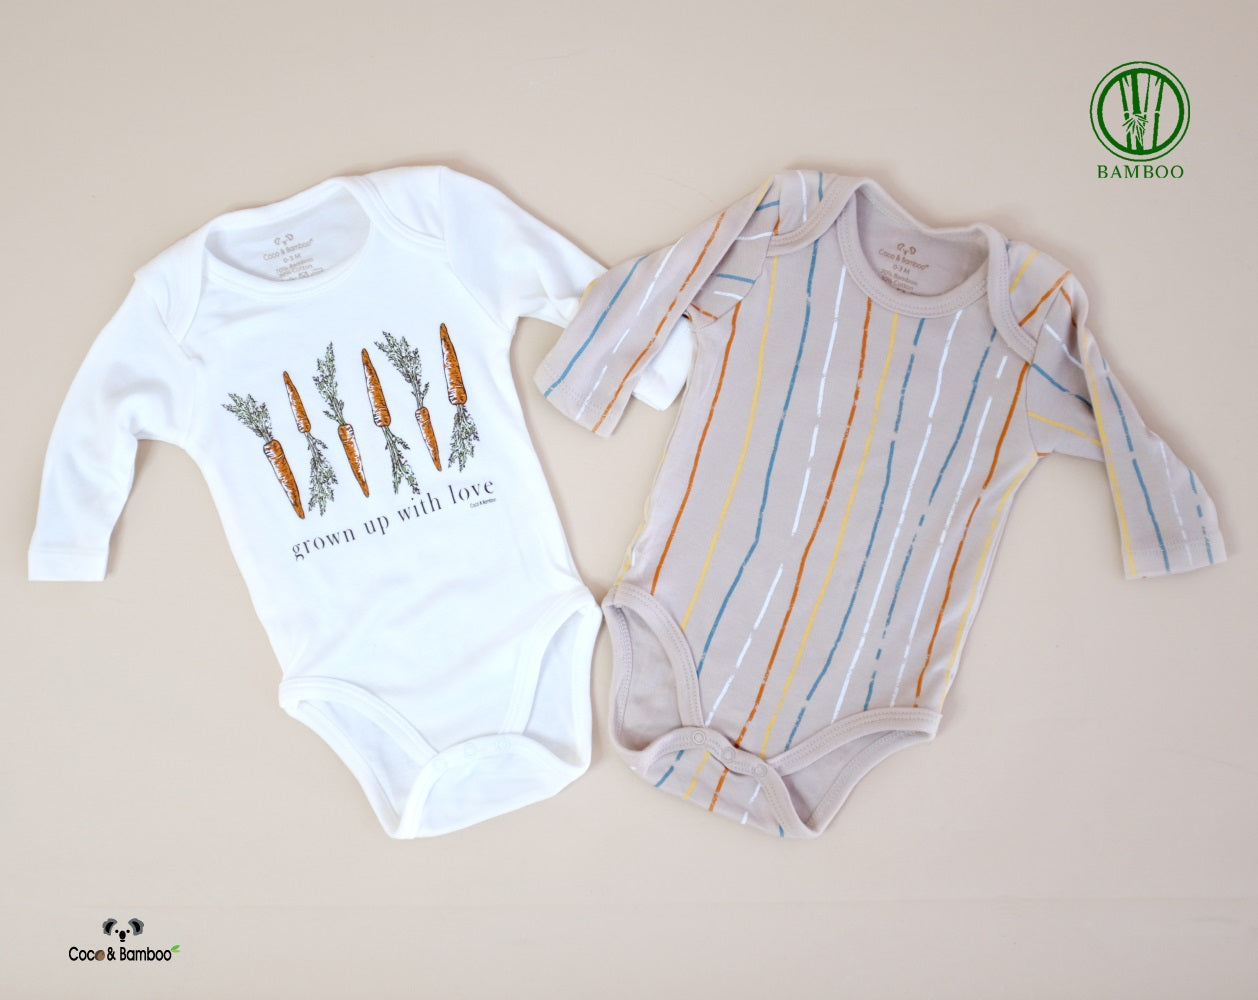 Long Sleeve Bamboo Body suit for babies made of soft cotton